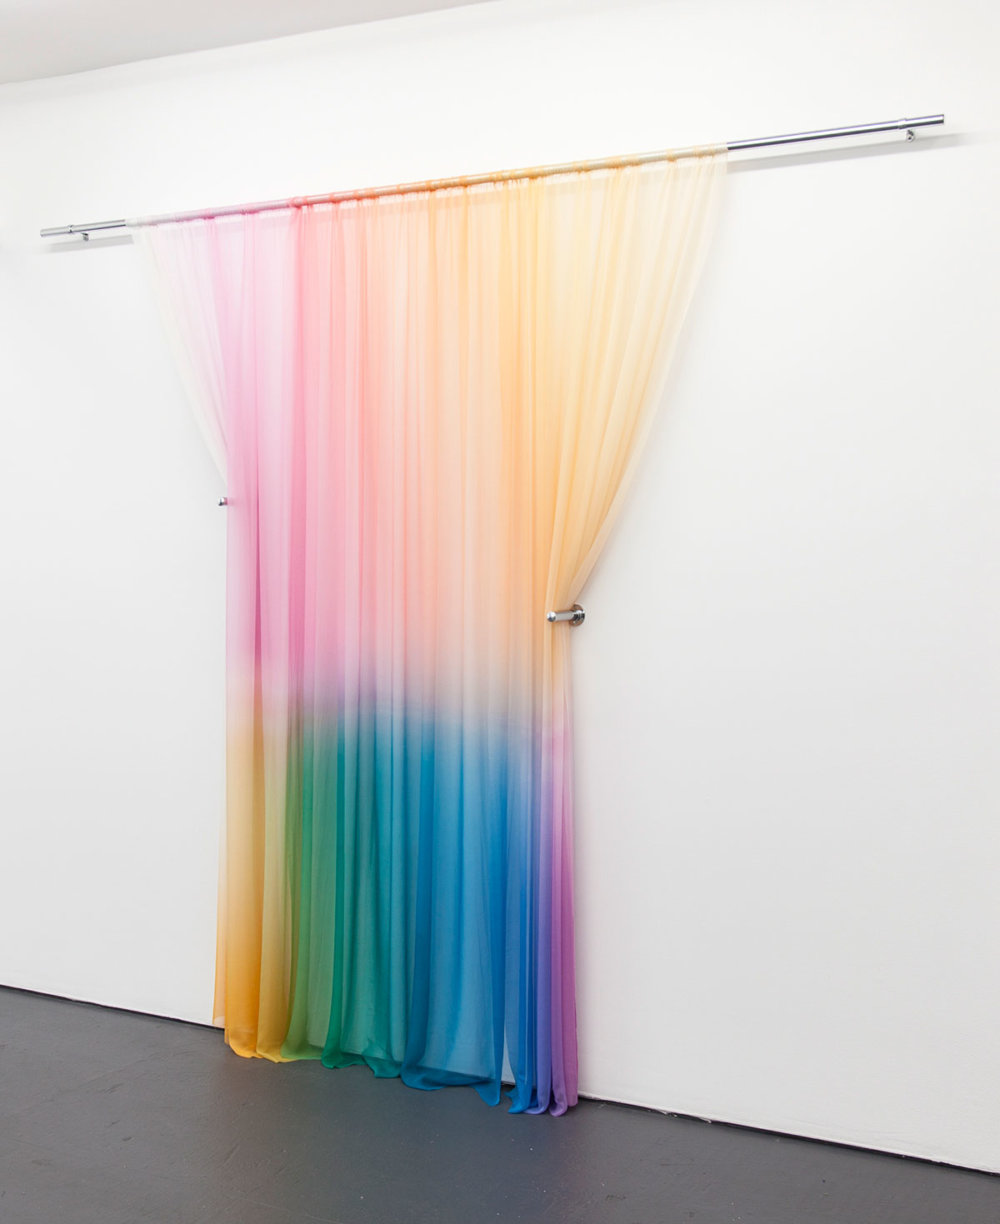 Equilibrum A Superb And Original Installation Of Colored Silk By Justin Morin 2